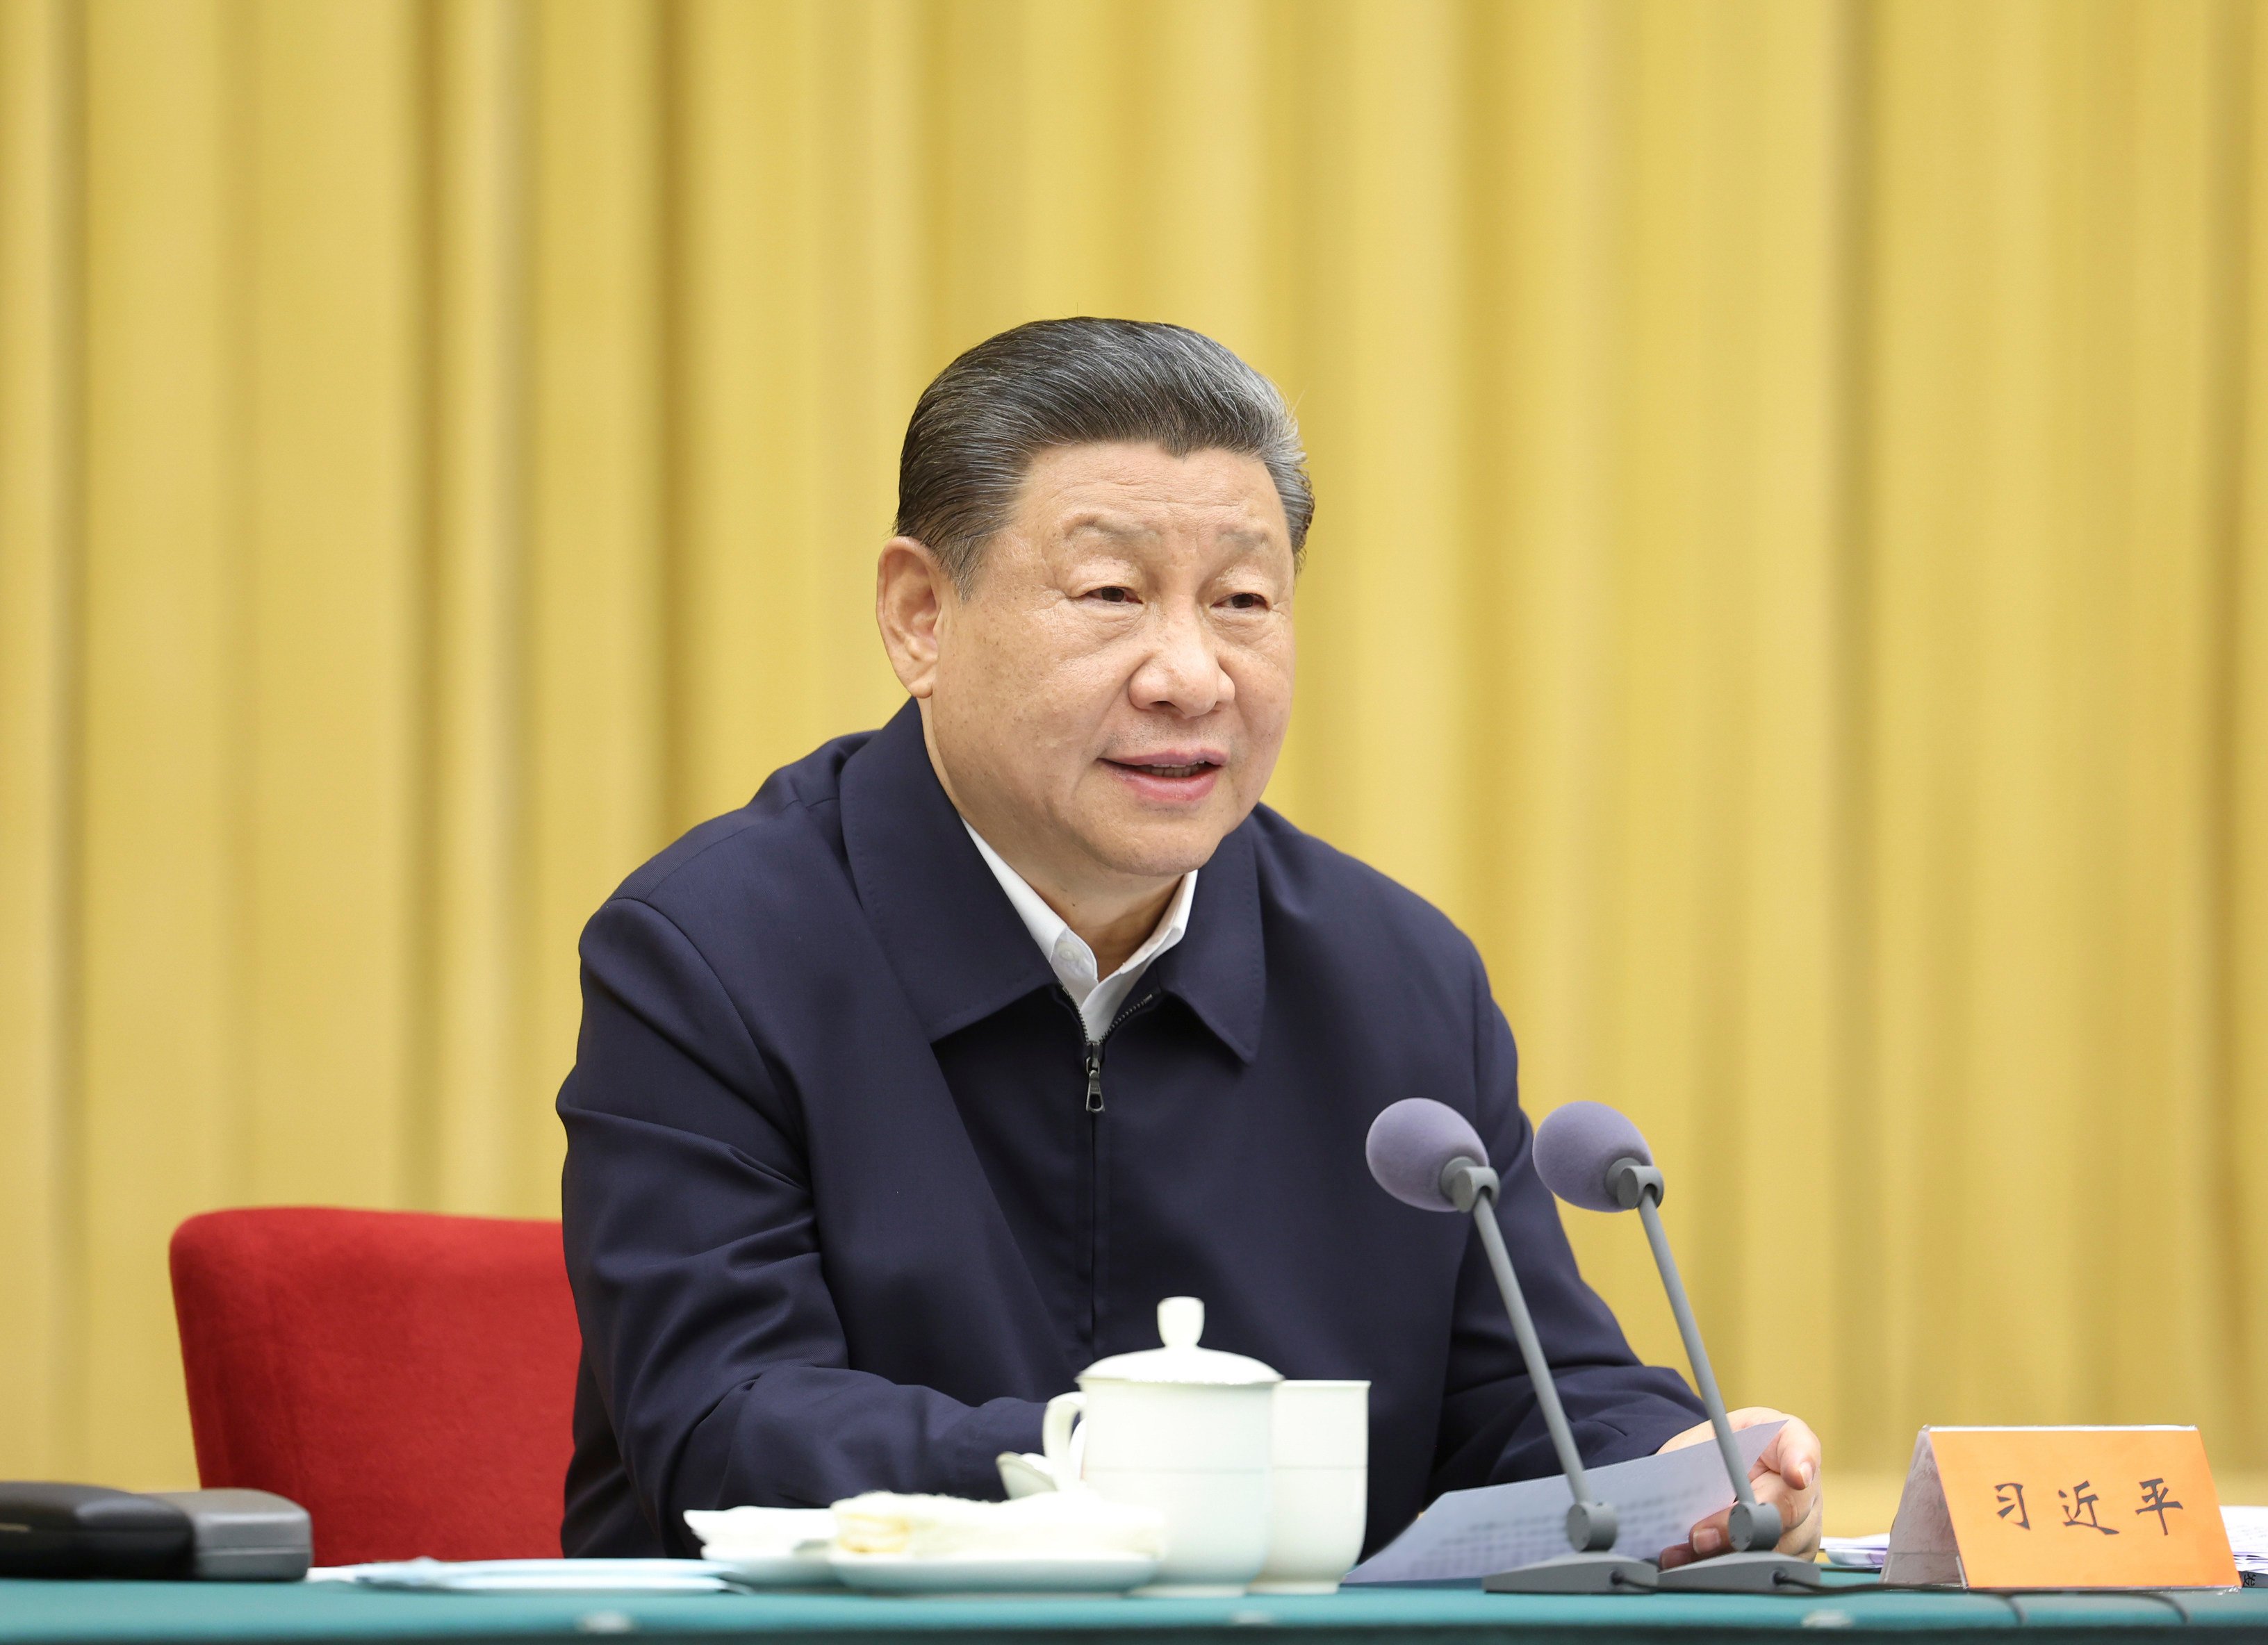 Chinese President Xi Jinping chairs a symposium on Tuesday during his three-day inspection trip to Chongqing. Photo: Xinhua